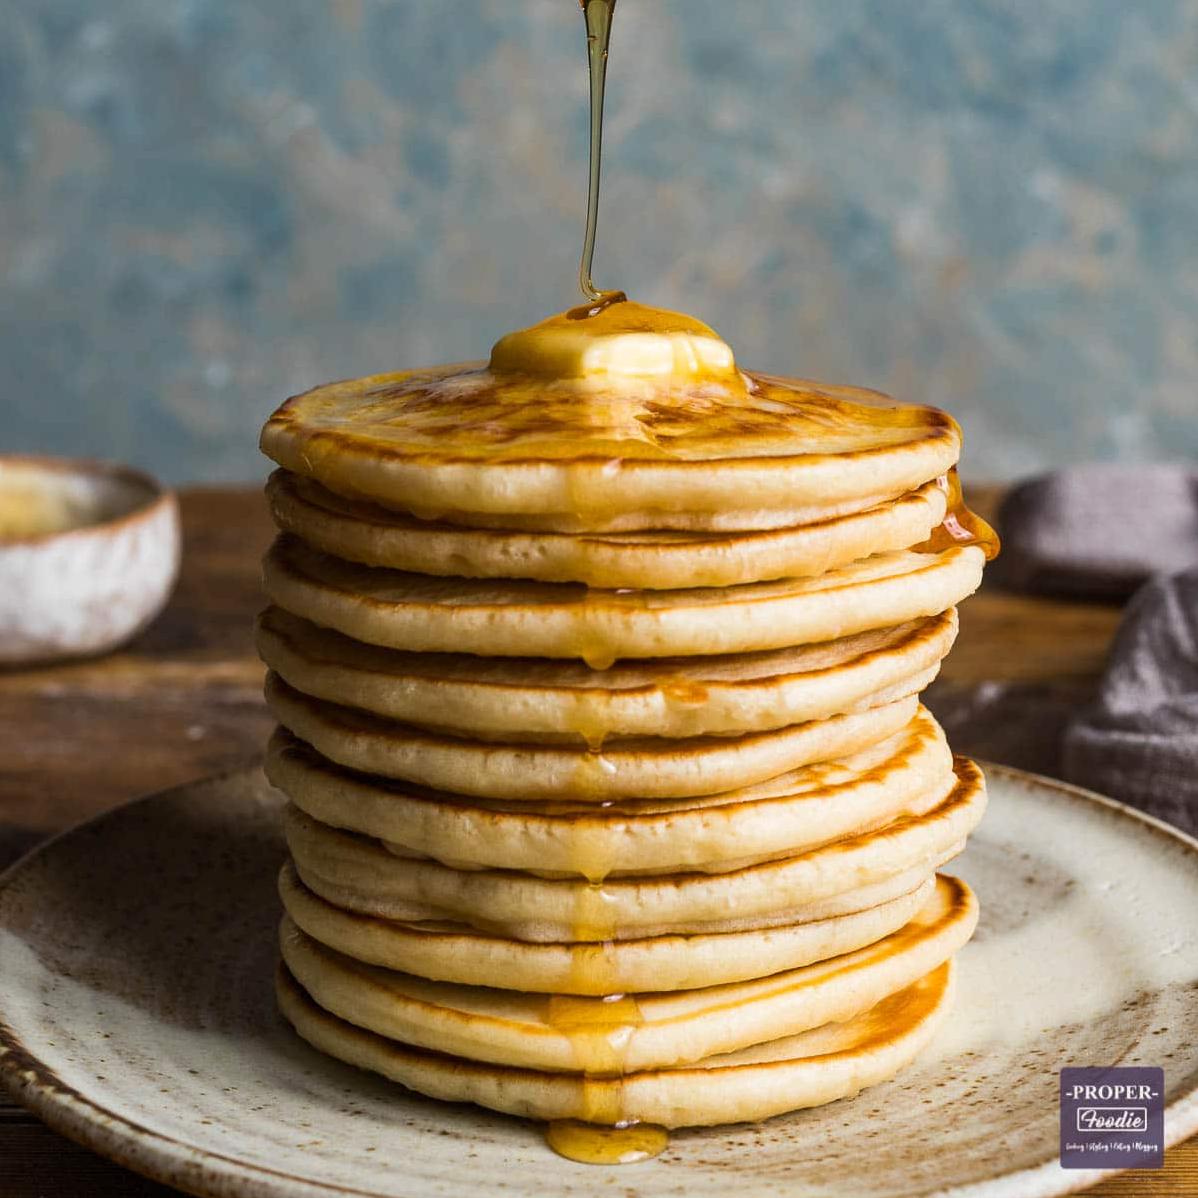  These Scottish pancakes are the perfect breakfast treat